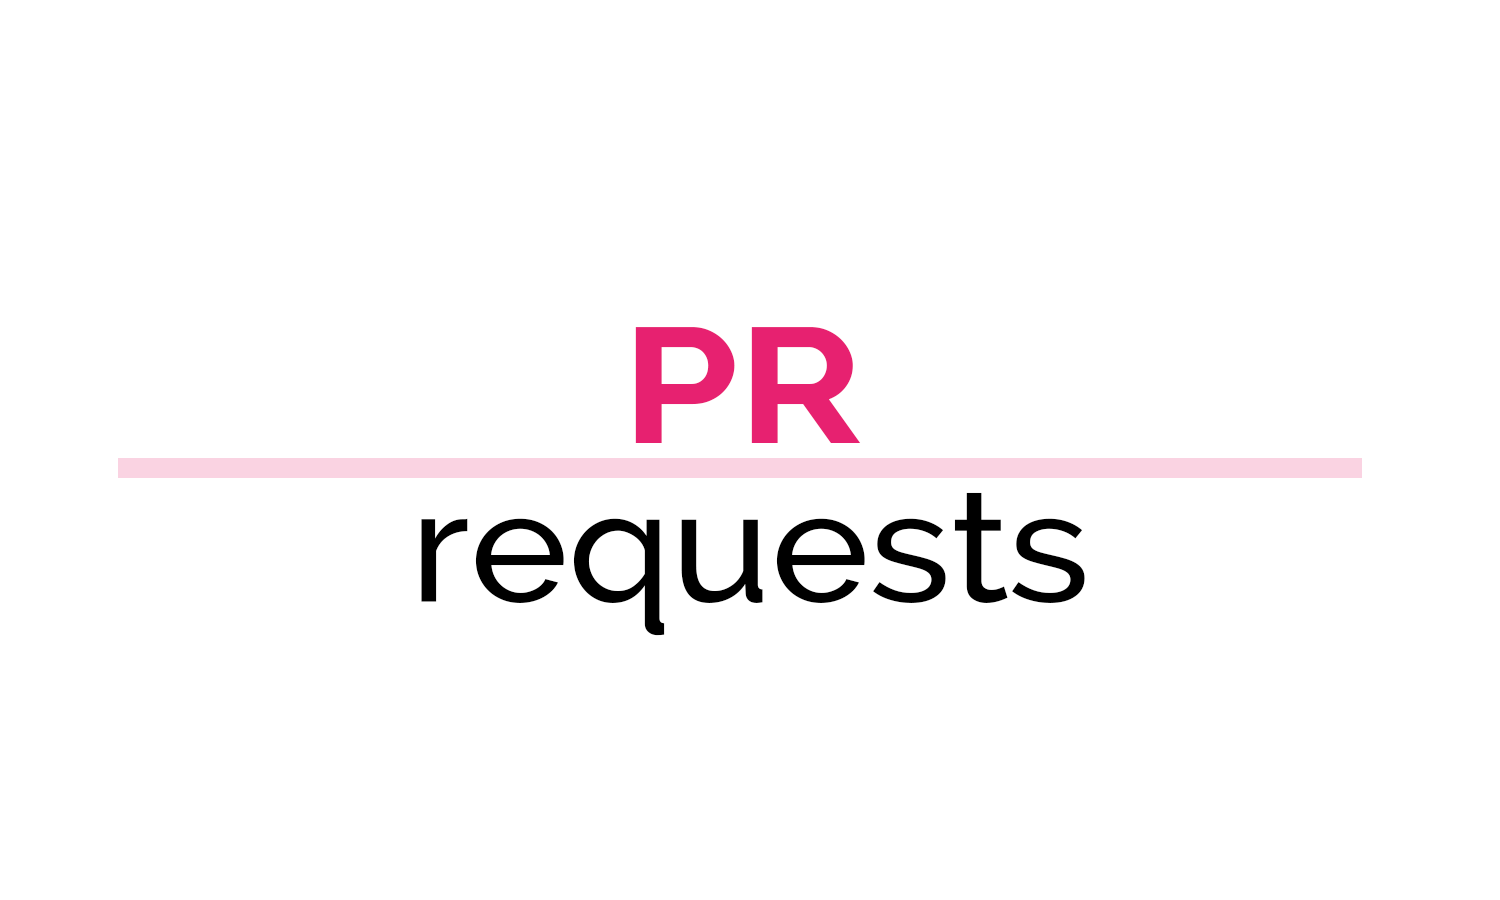 PR consultancy seeks influencers for complimentary hair salon appointments in exchange for content 